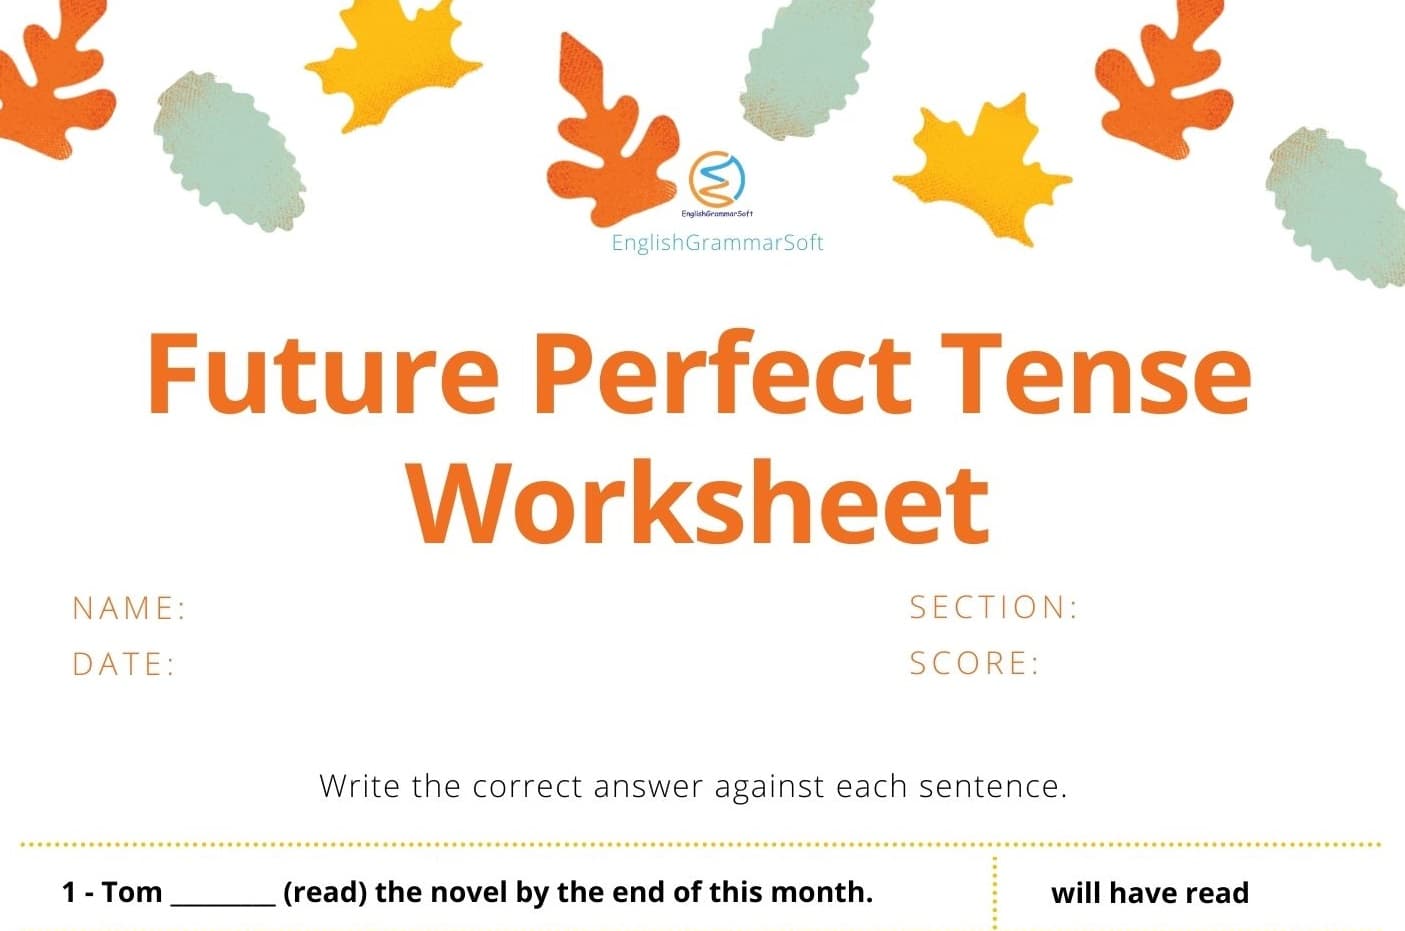 Worksheets on Future Perfect Tense